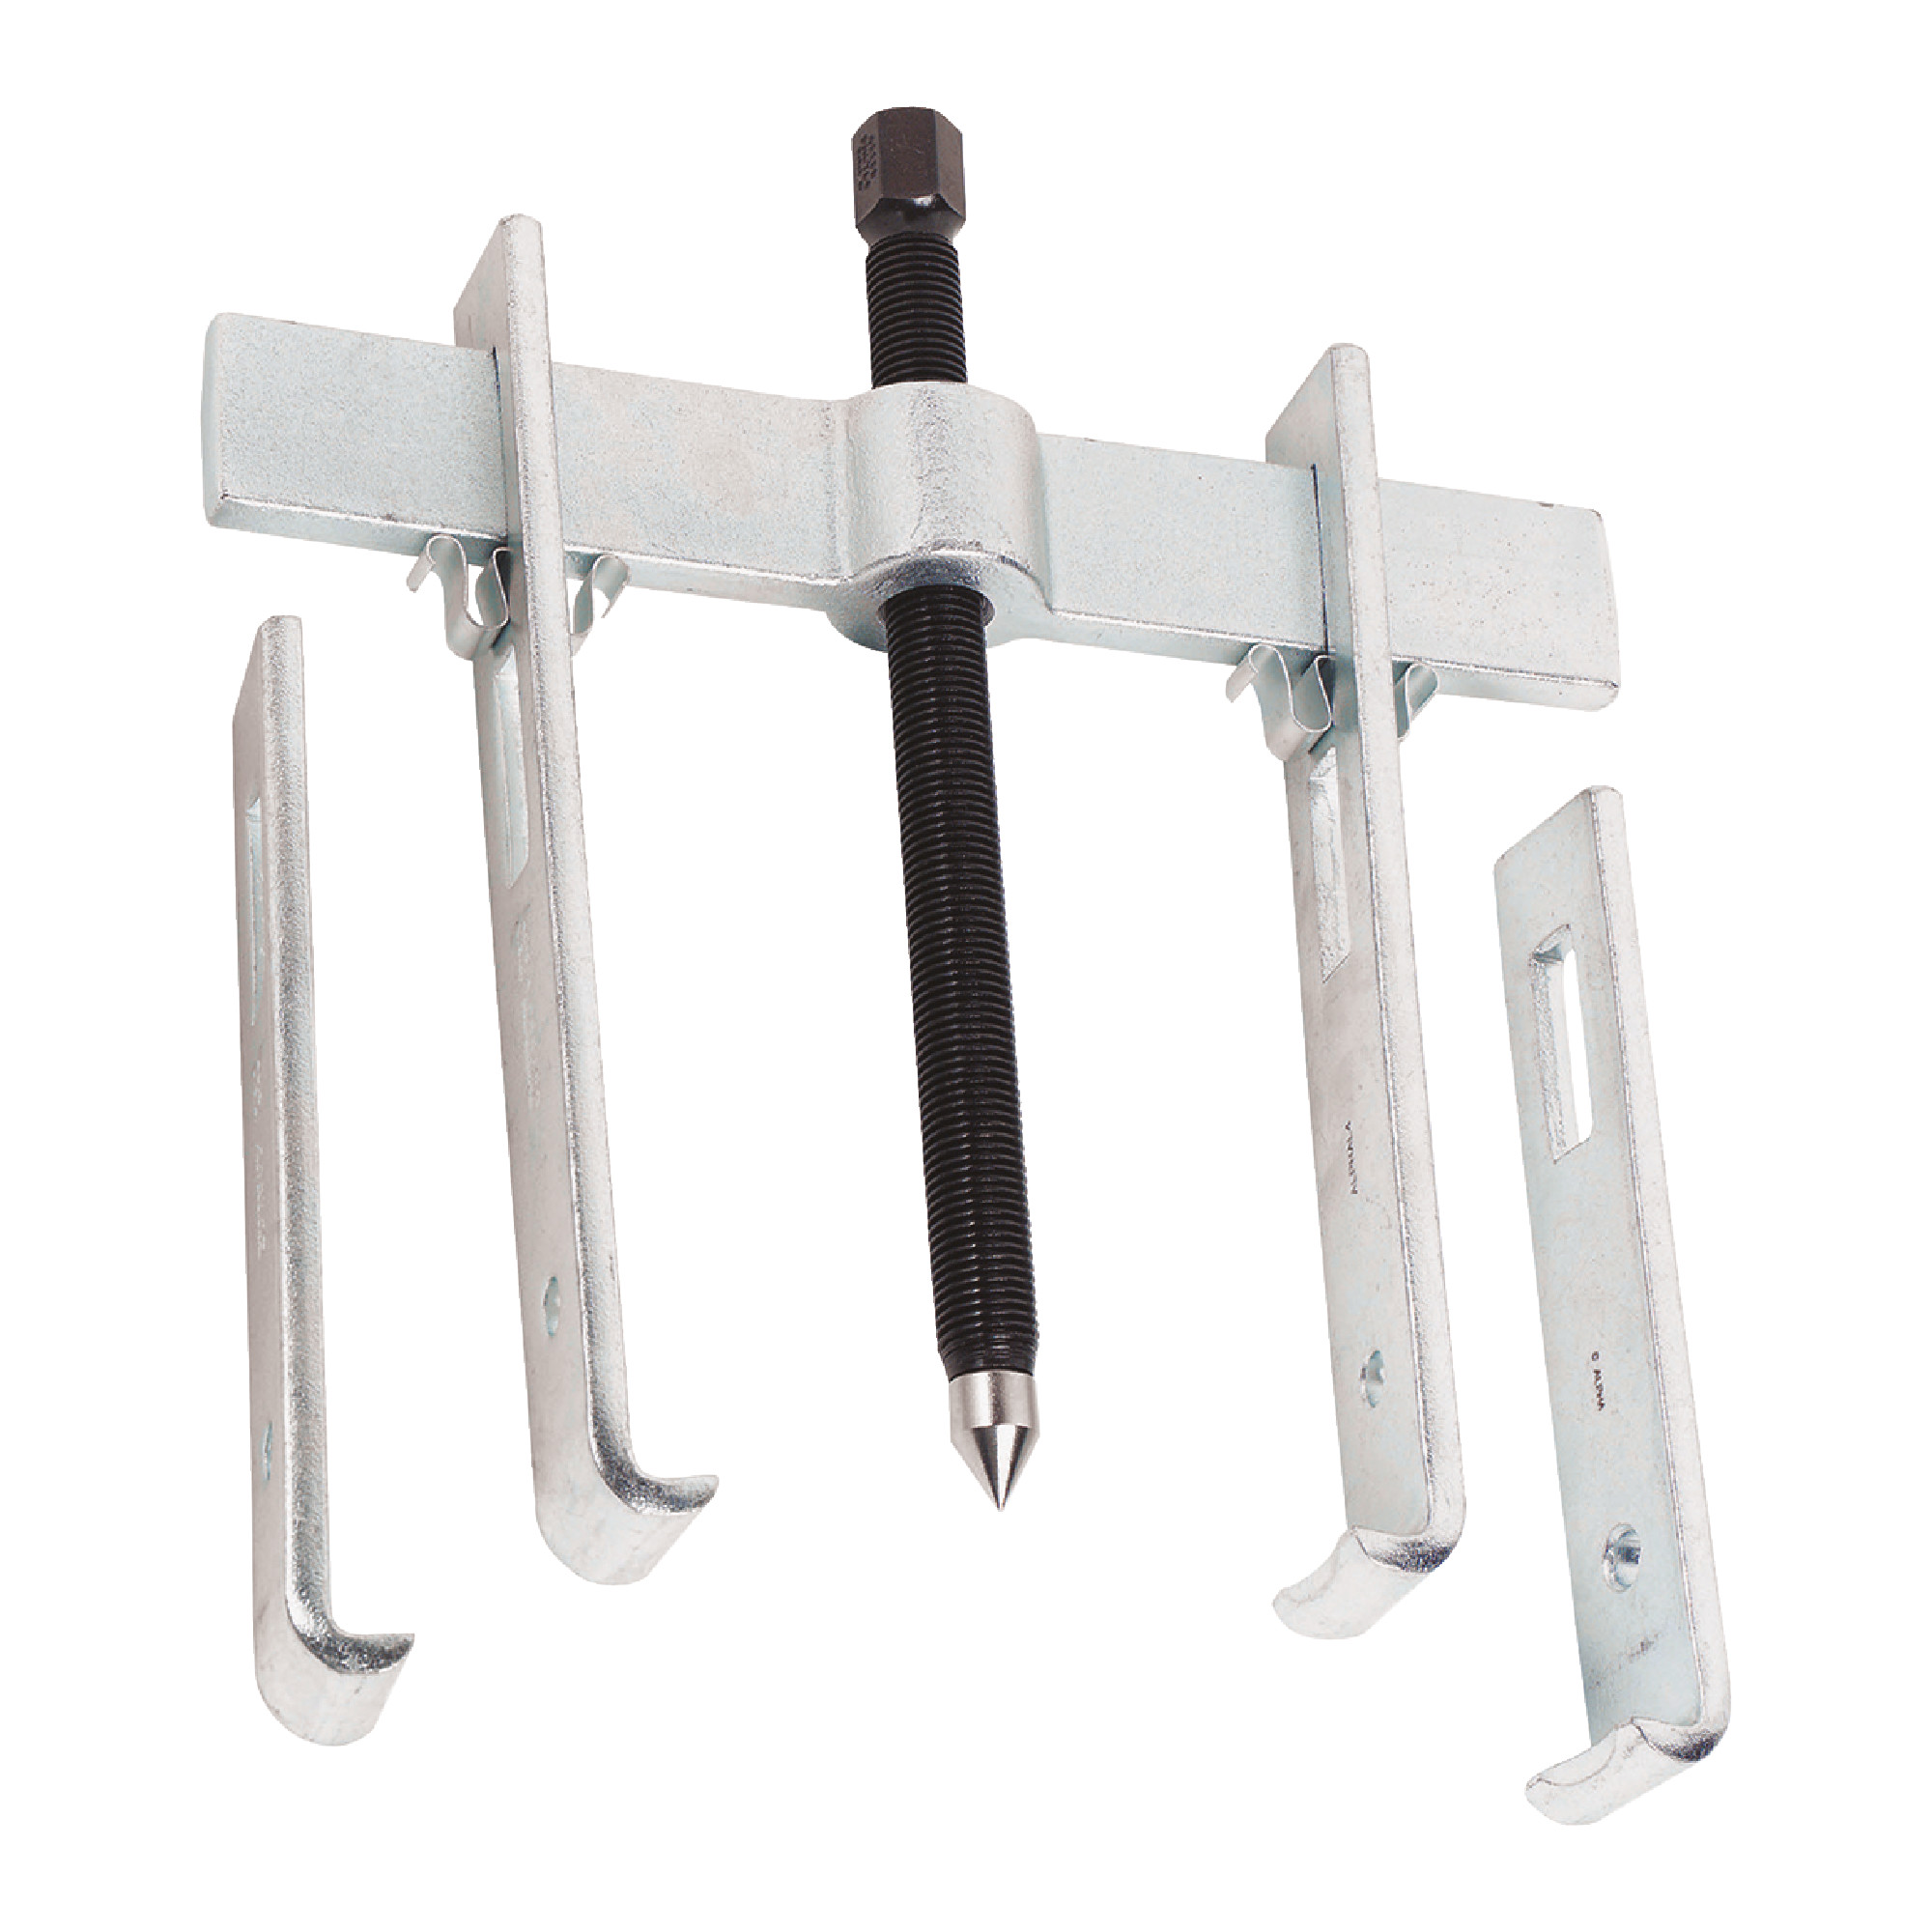 Straight 2-Way Jaw Puller Set